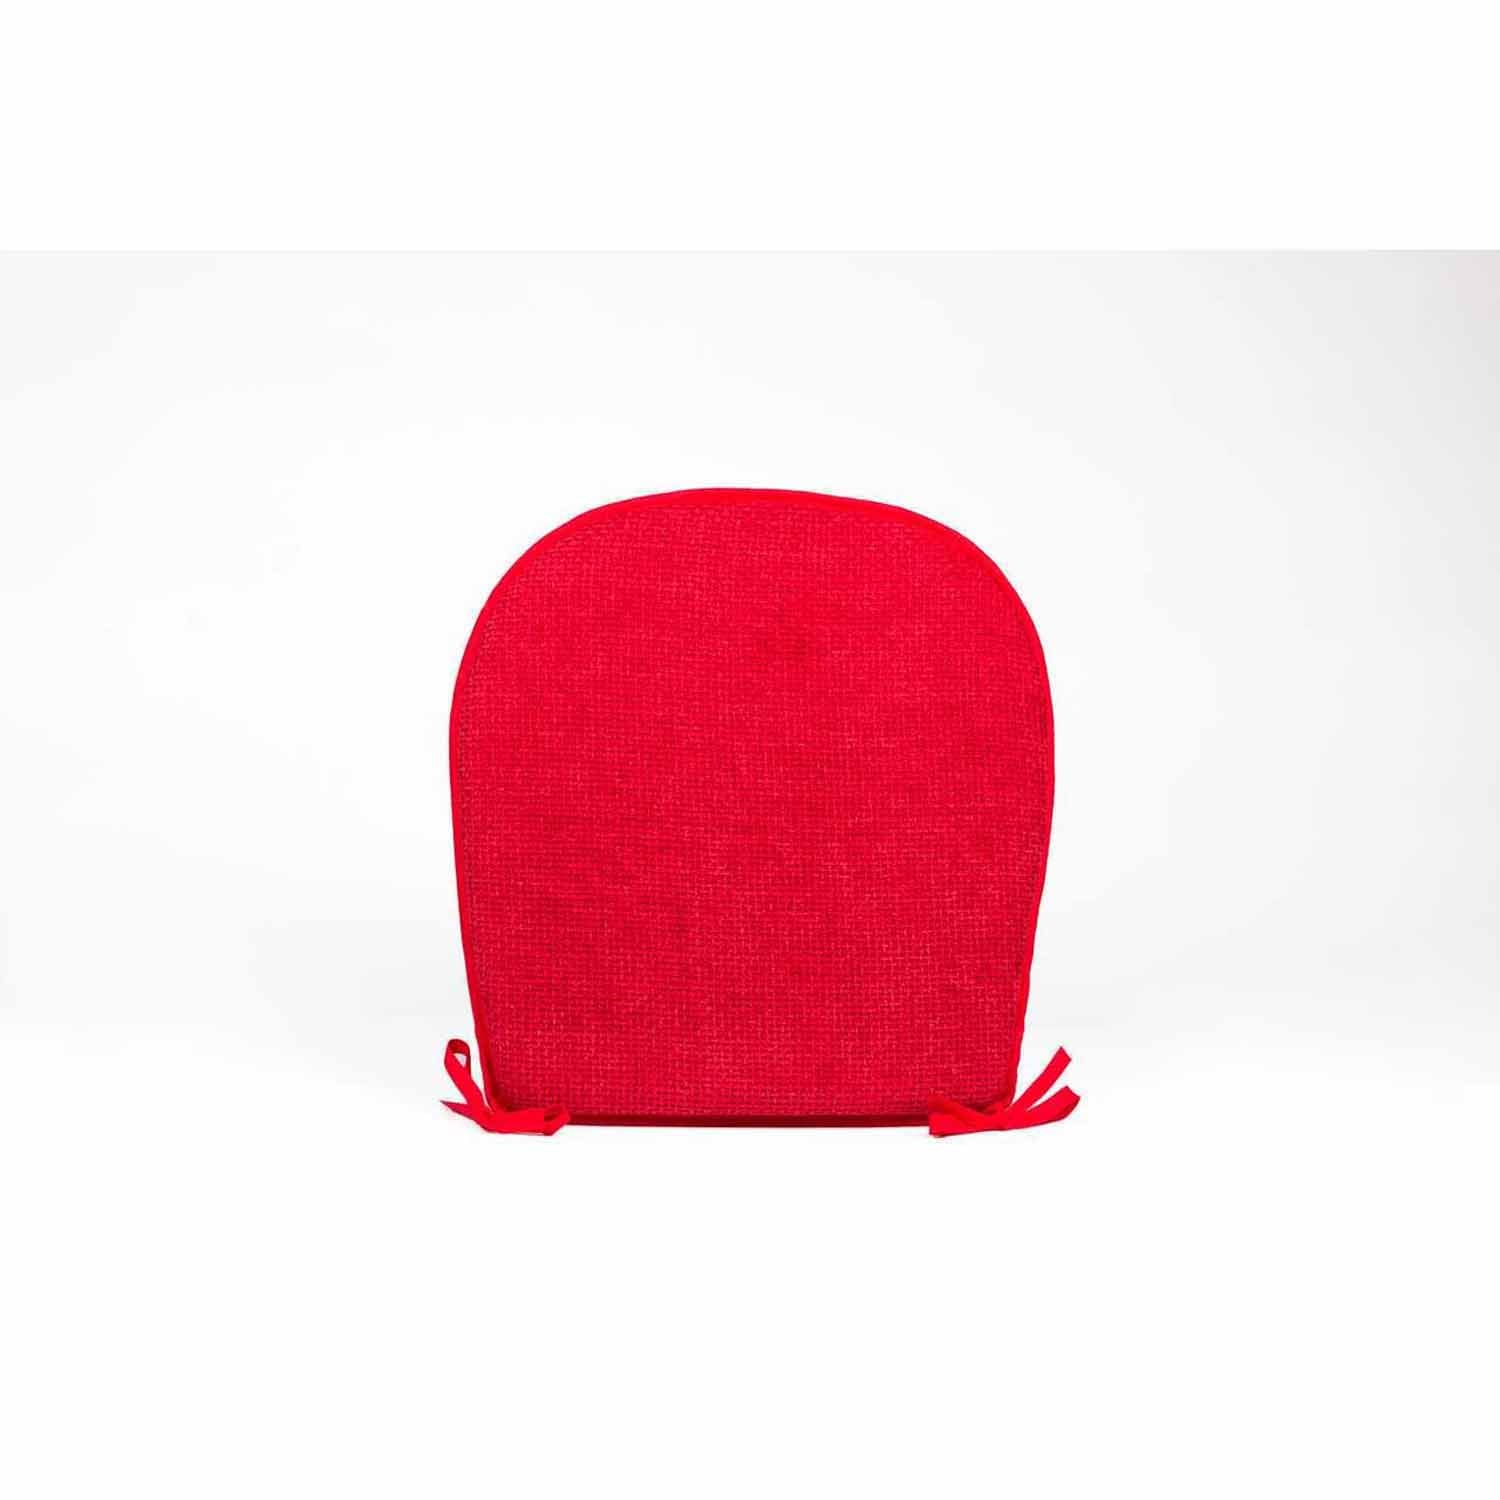 Home &amp; Interiors Chenille Chair Pad - Red 1 Shaws Department Stores